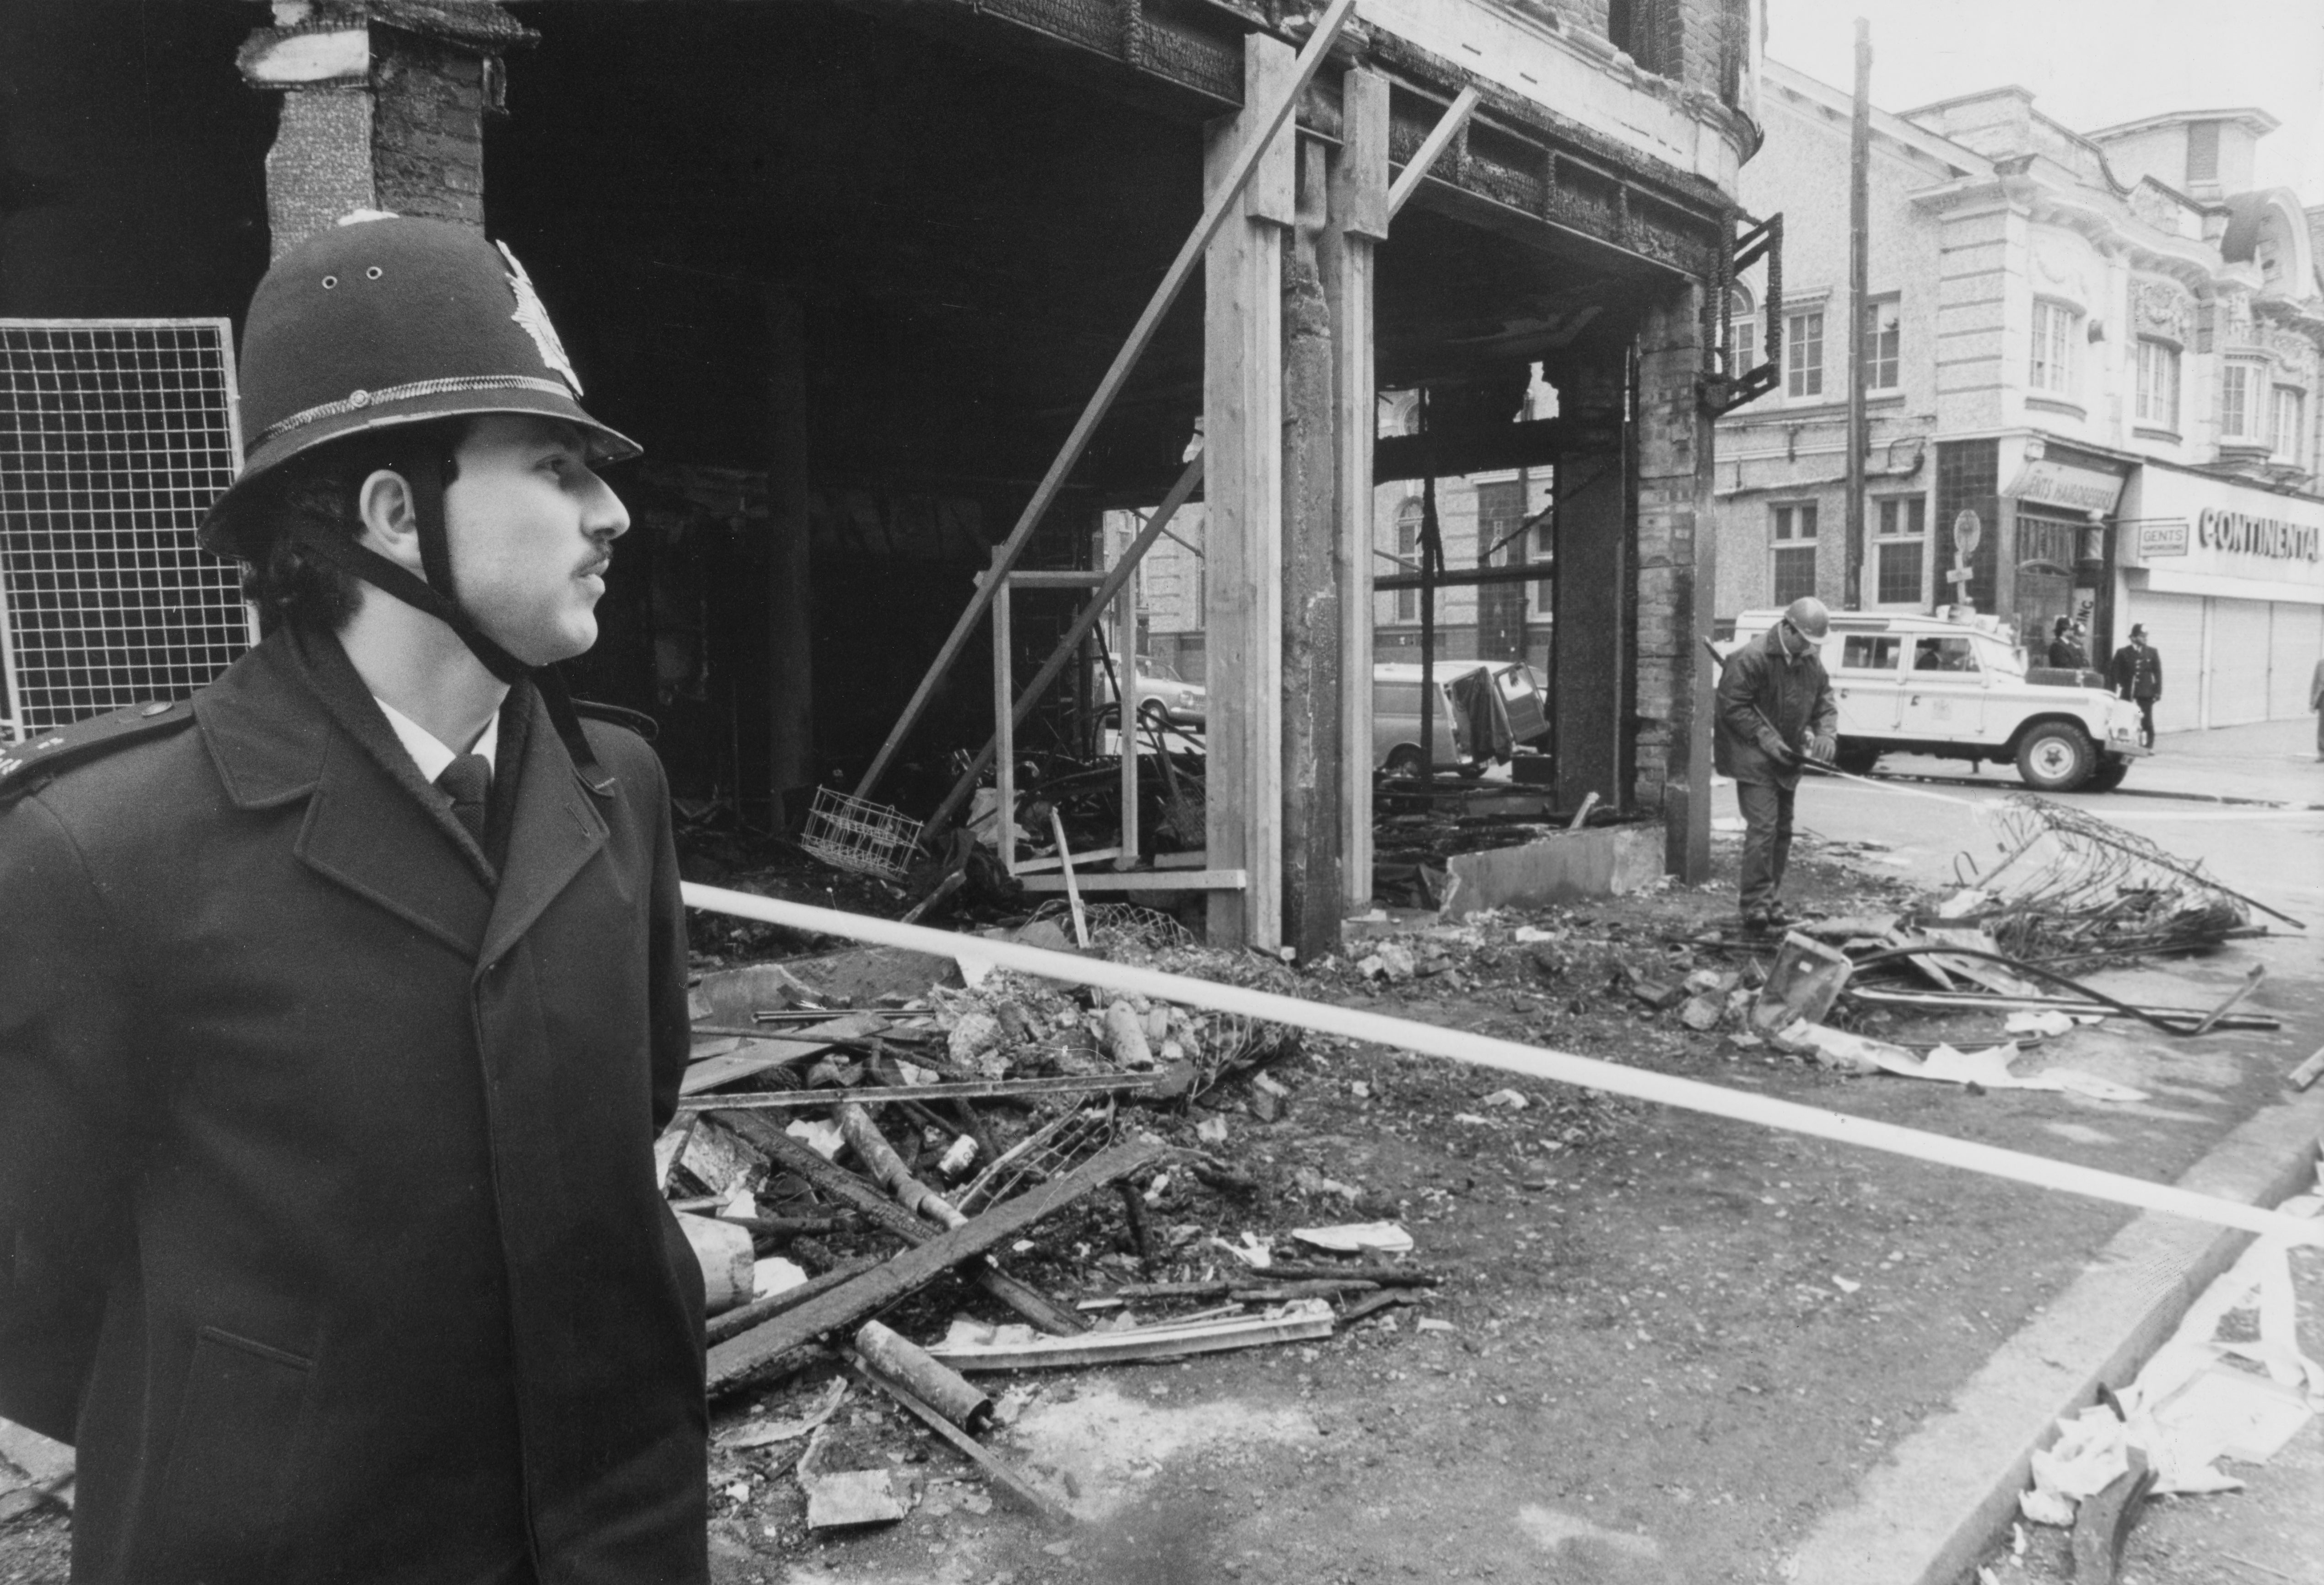 A police officer stands next to a gutted building on Coldharbour Lane after riots erupted on the streets of Brixton in April 1981